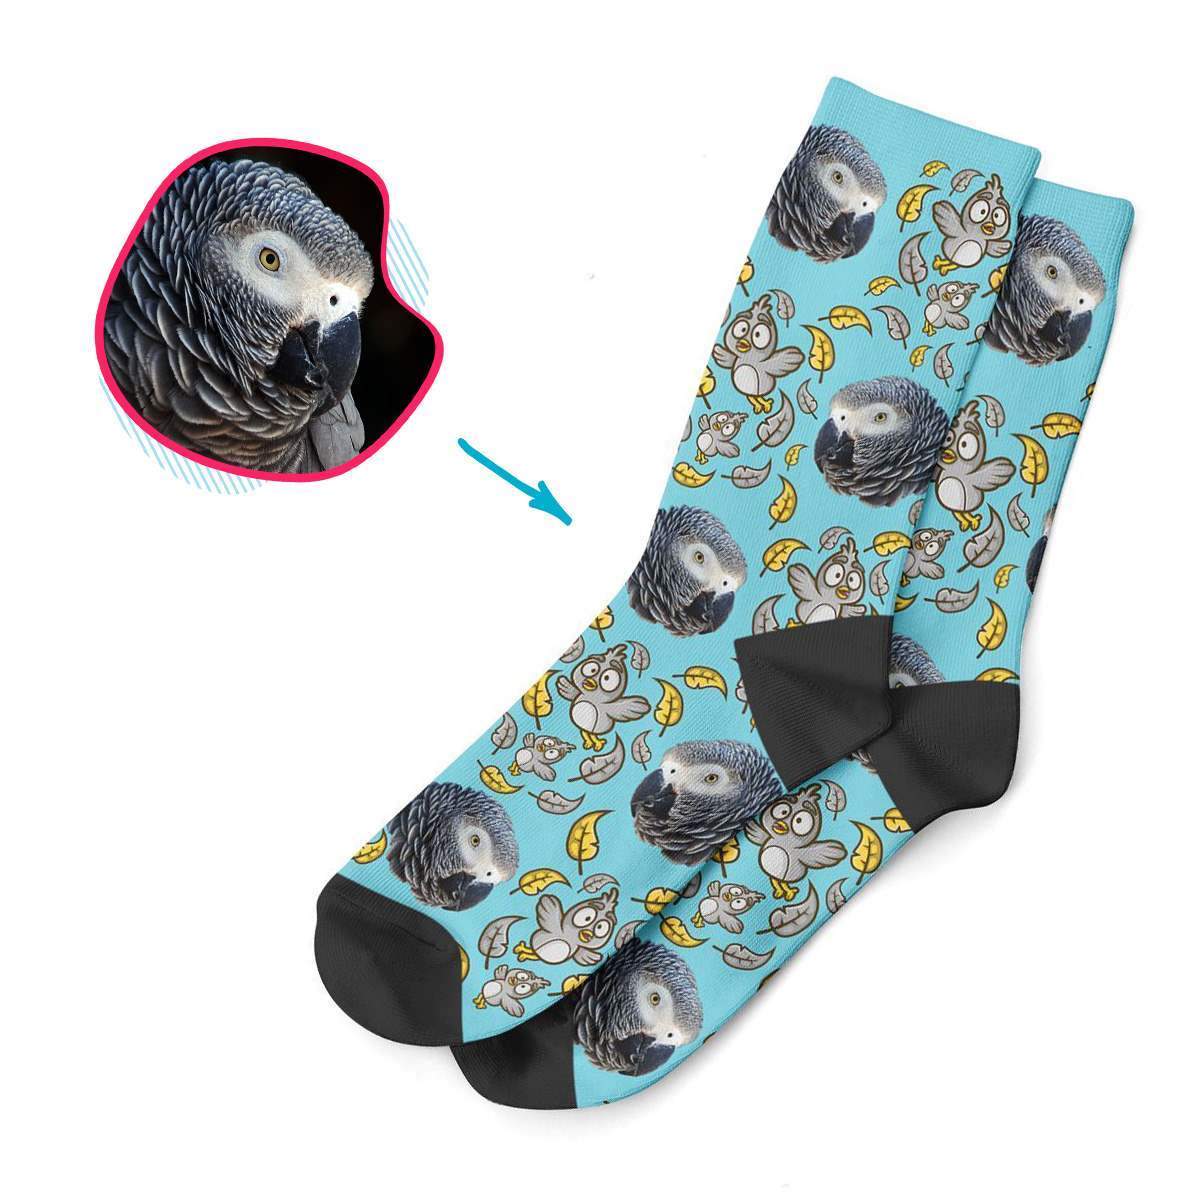 blue Bird socks personalized with photo of face printed on them